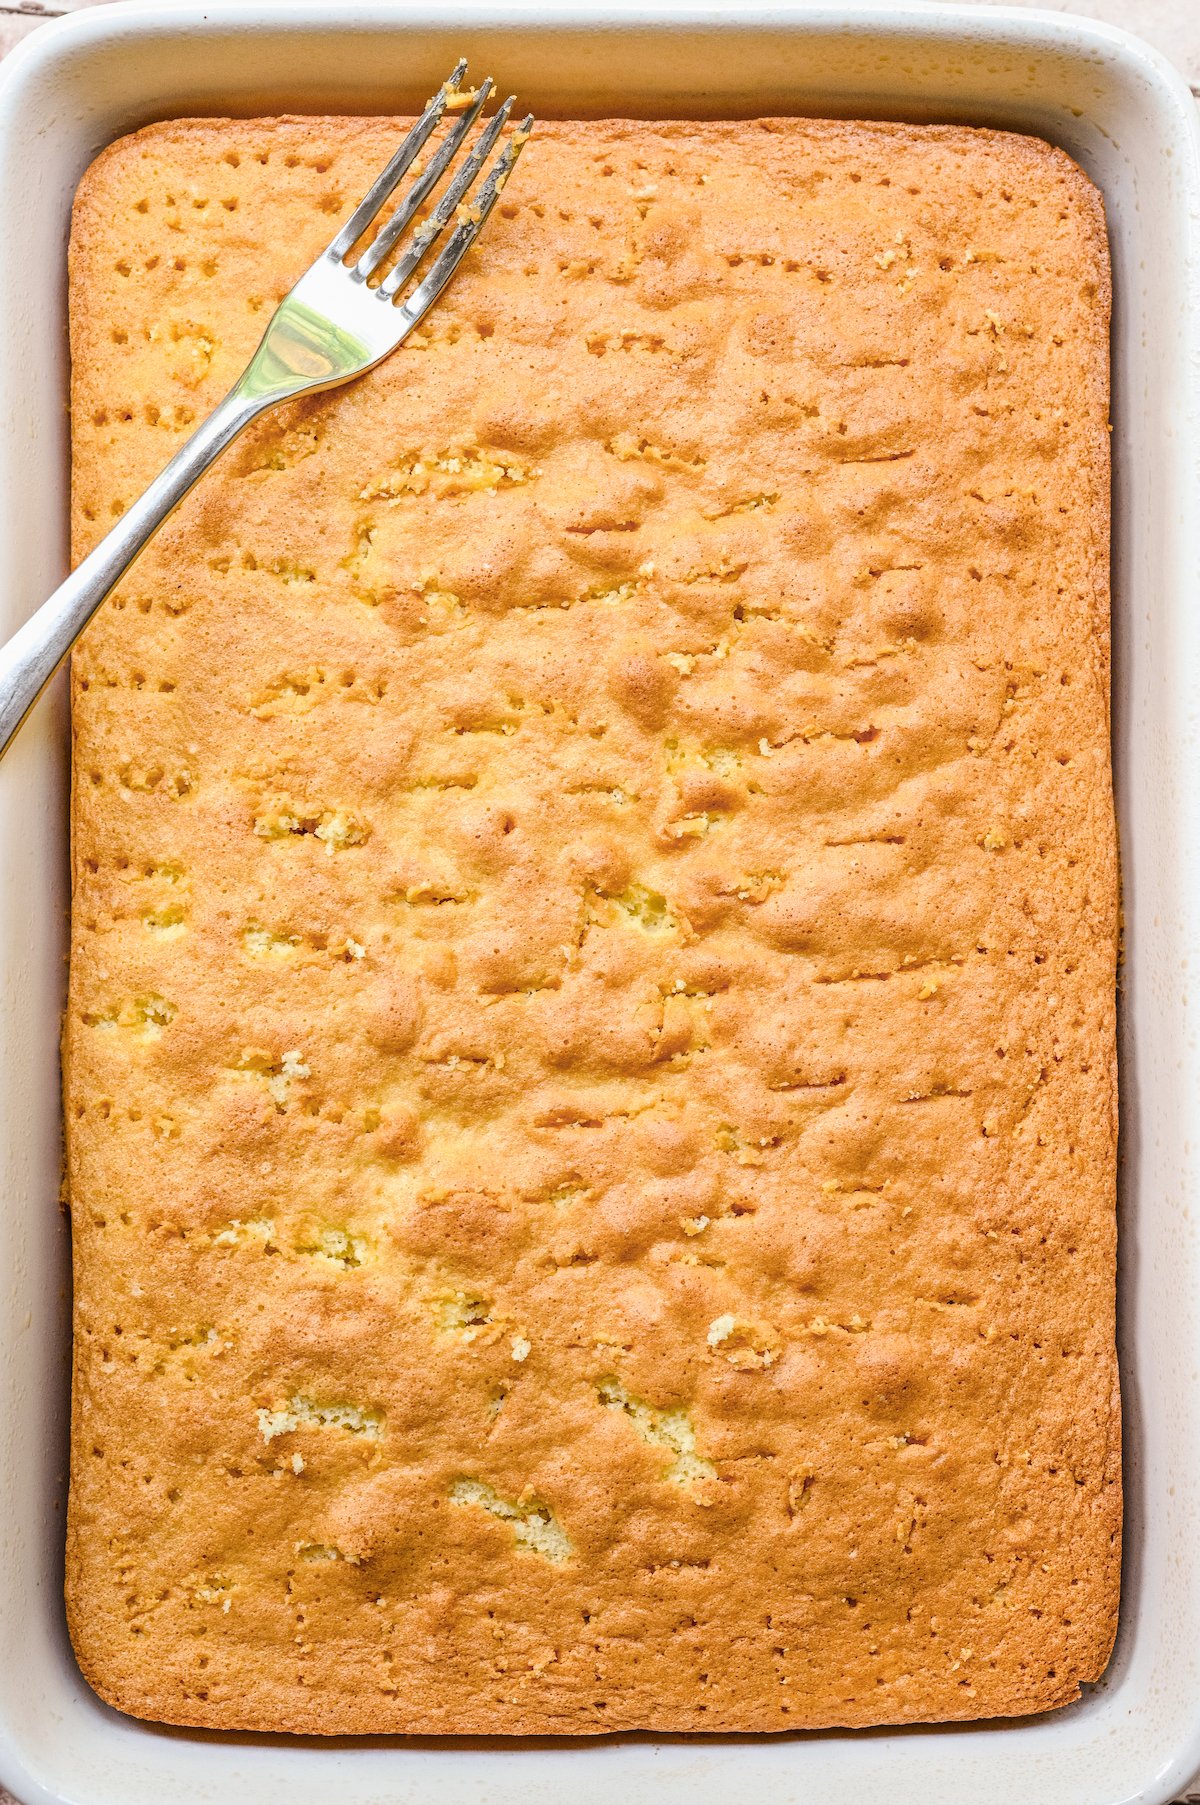 A sheet of vanilla cake in a pan covered in tiny holes made by fork tines with a fork lying on top.